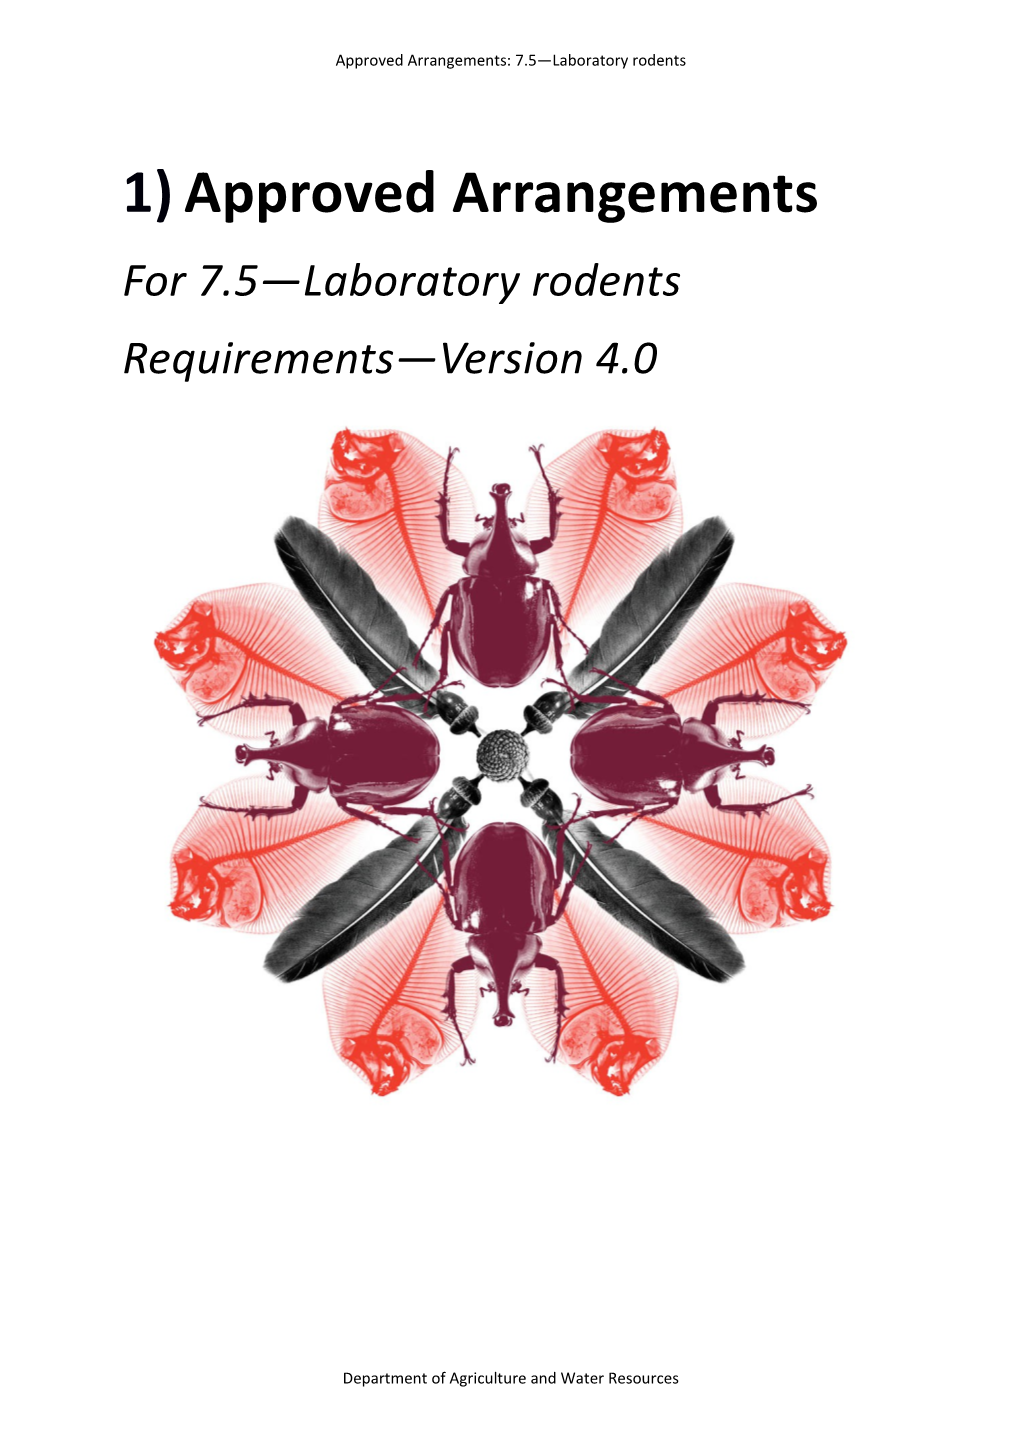 Approved Arrangements for 7.5 - Laboratory Rodents: Requirements